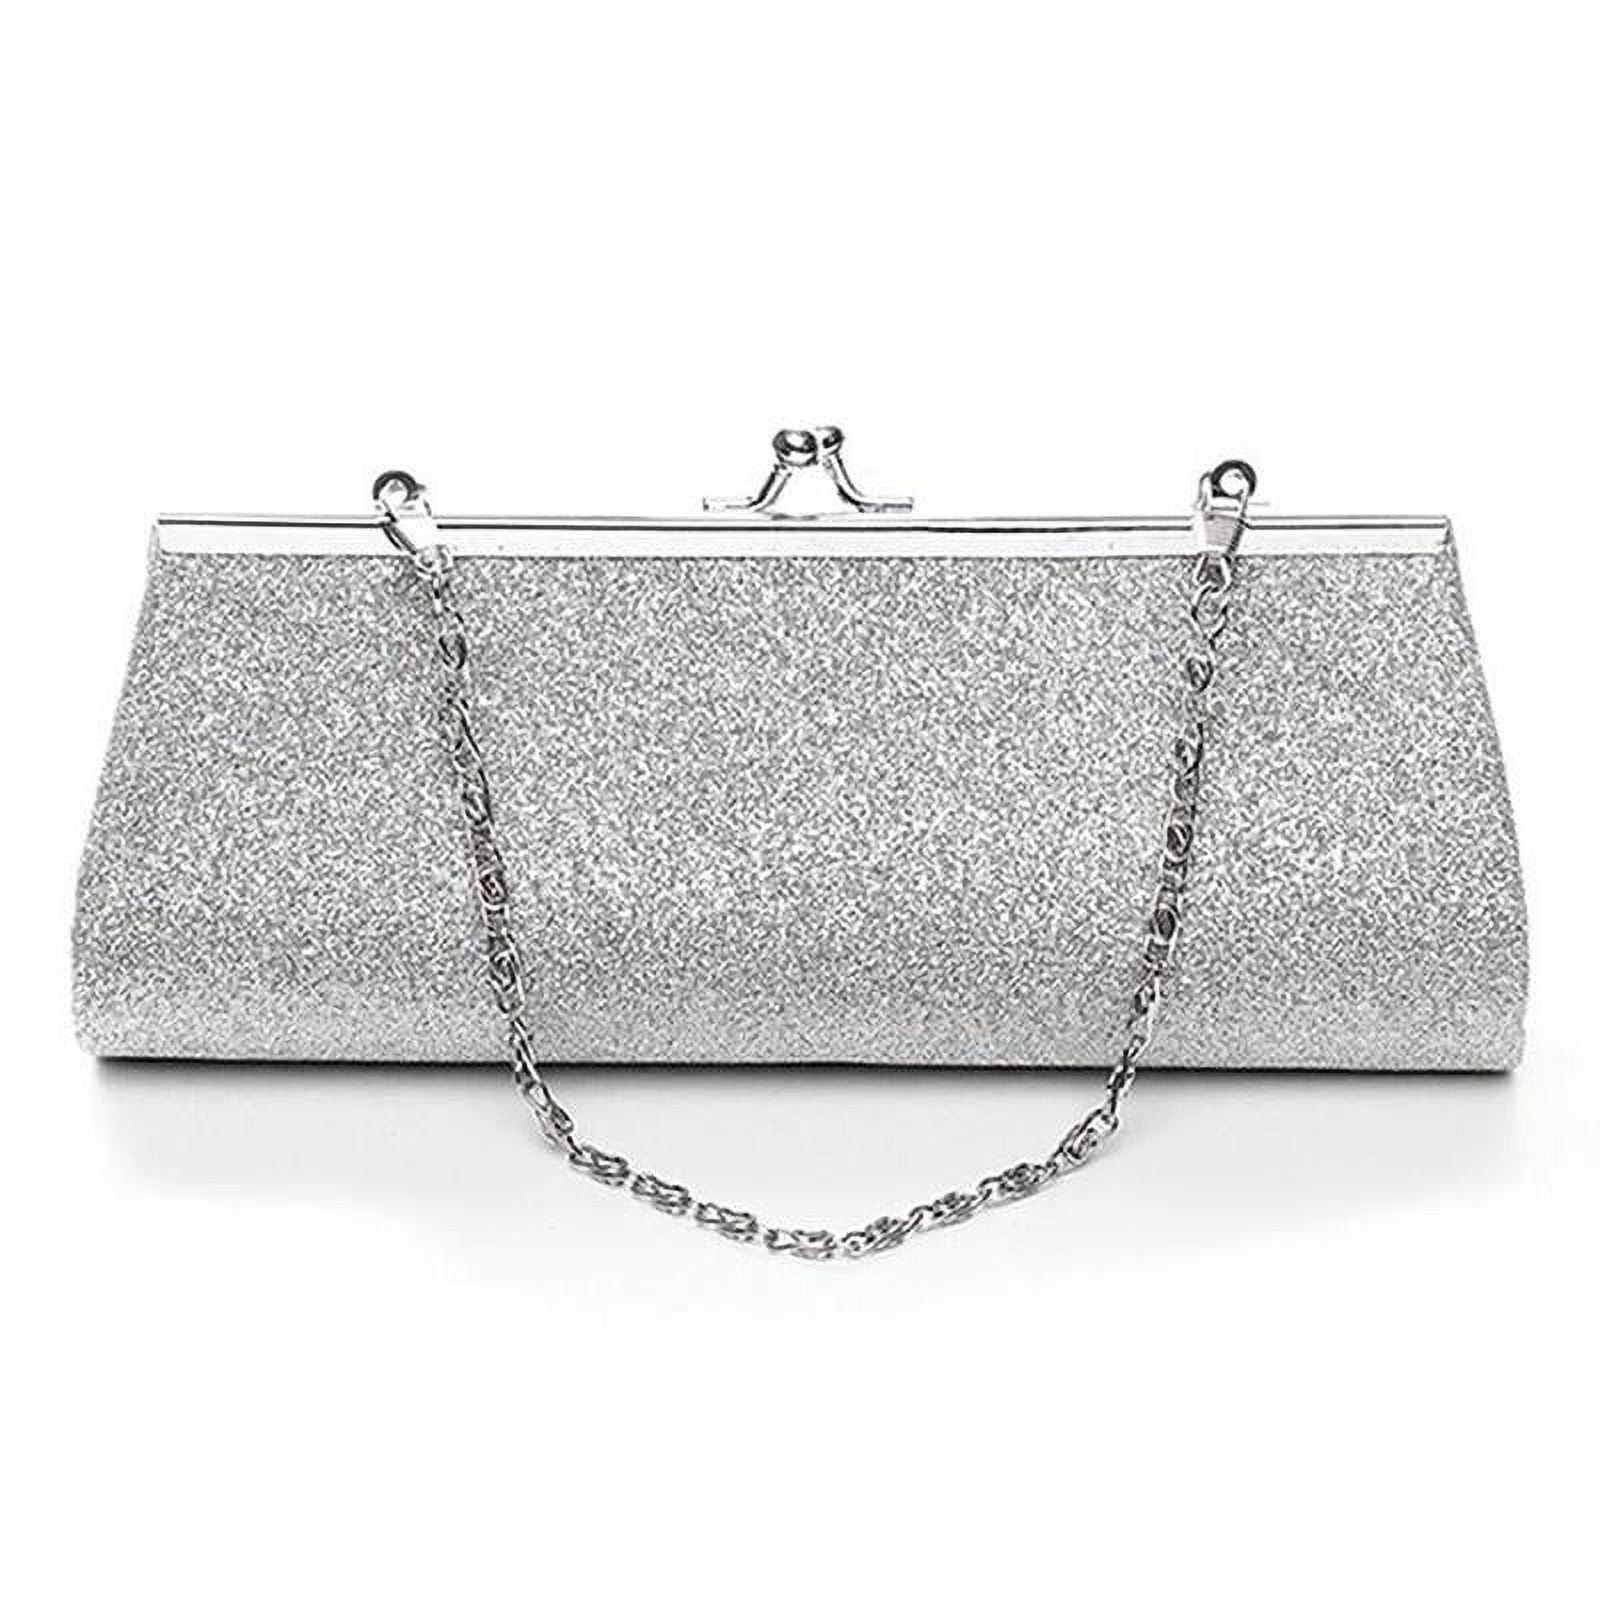 Silver Sequin Clutch Bag Sparkly Top Handle Evening Clutches | Baginning